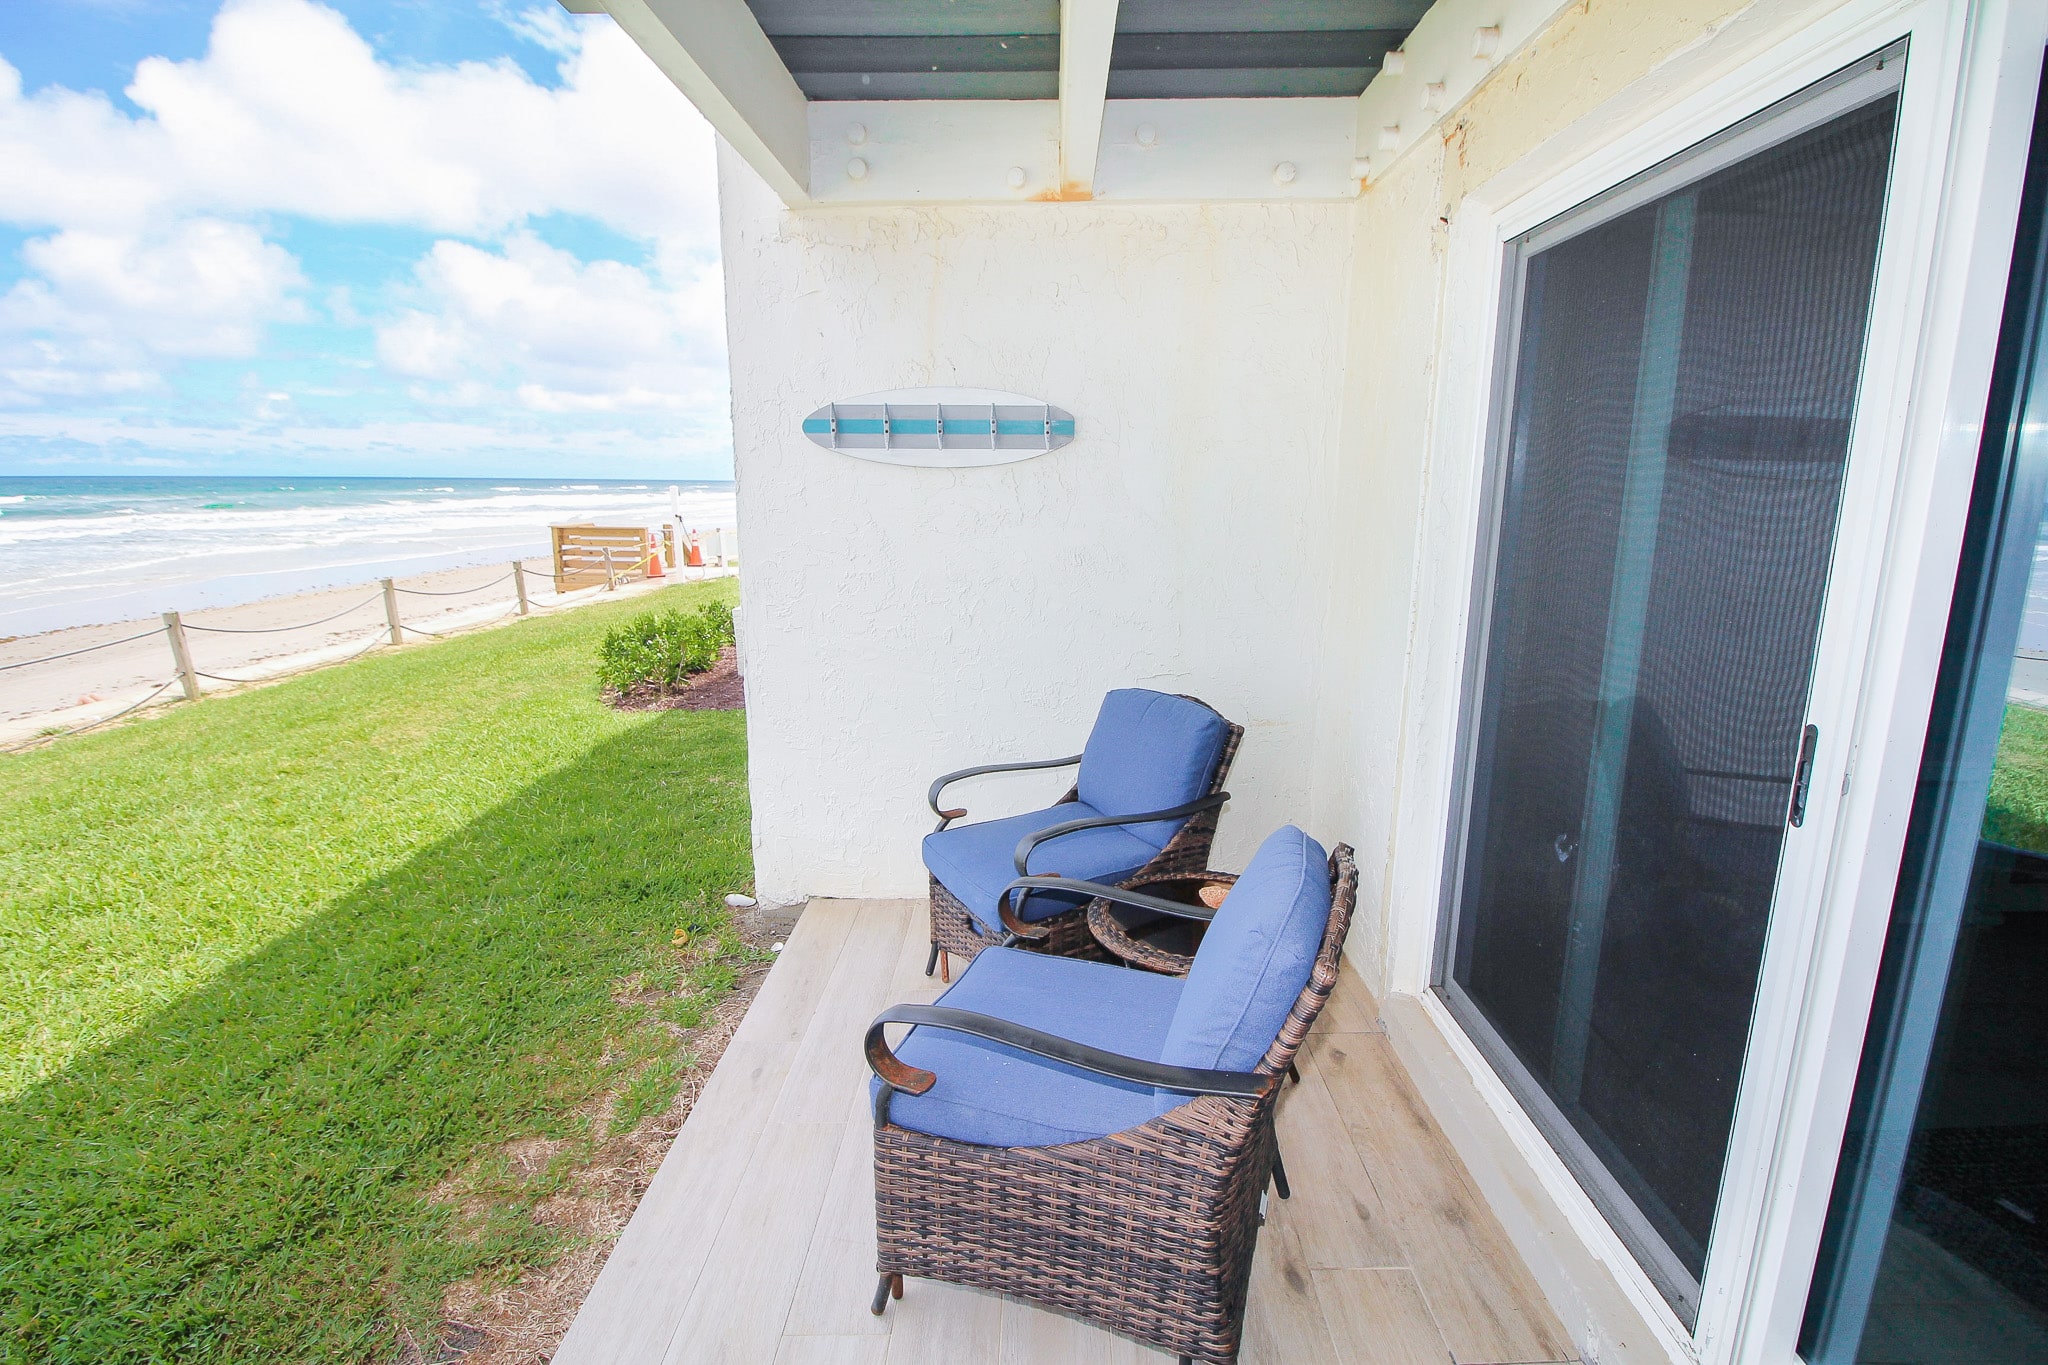 Unwind to the sound of ocean waves in your backyard